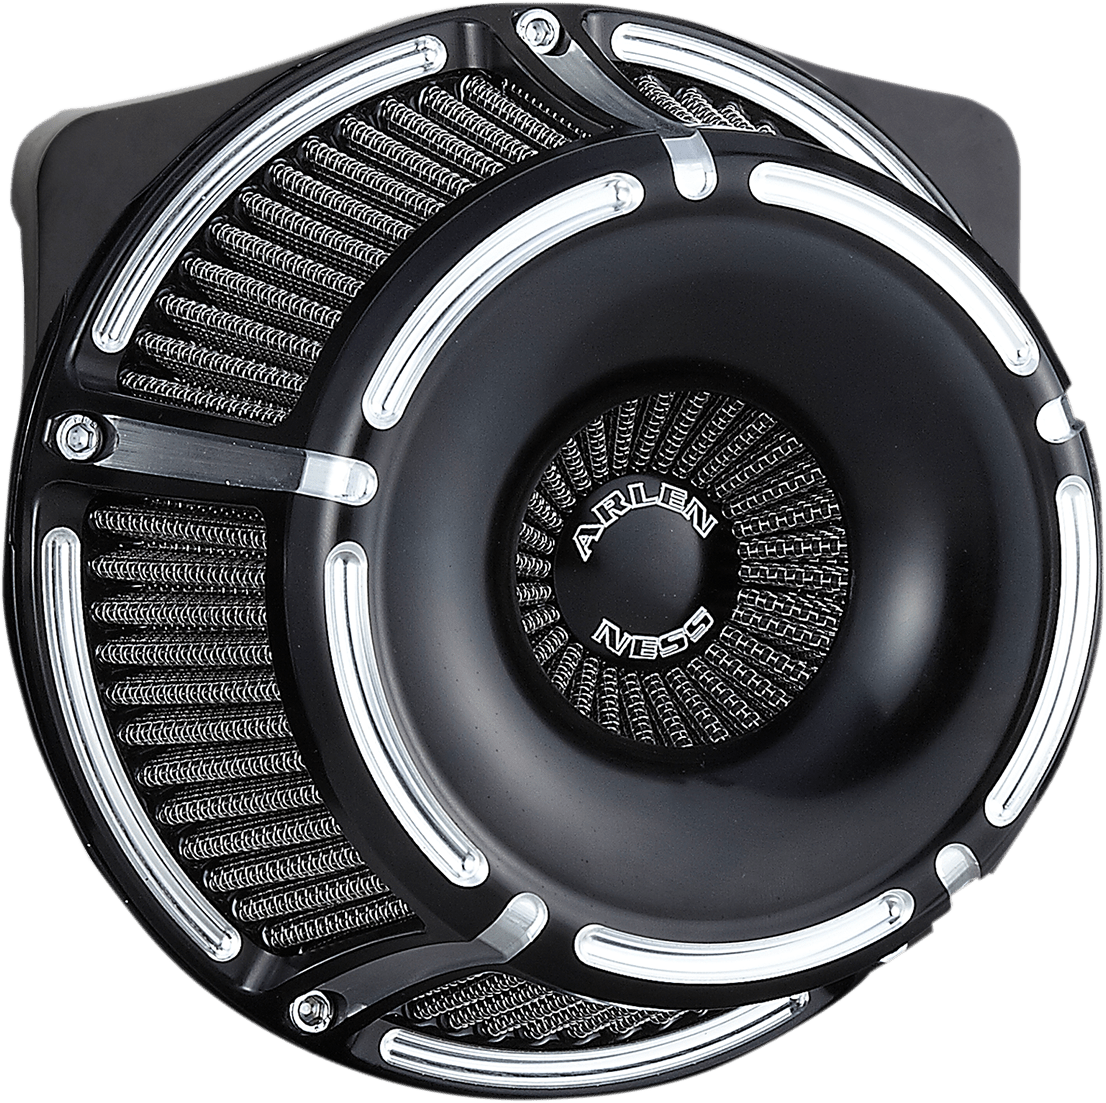 ARLEN NESS-"Slot Track" Inverted Series Air Cleaner Kits-Air Filter-MetalCore Harley Supply